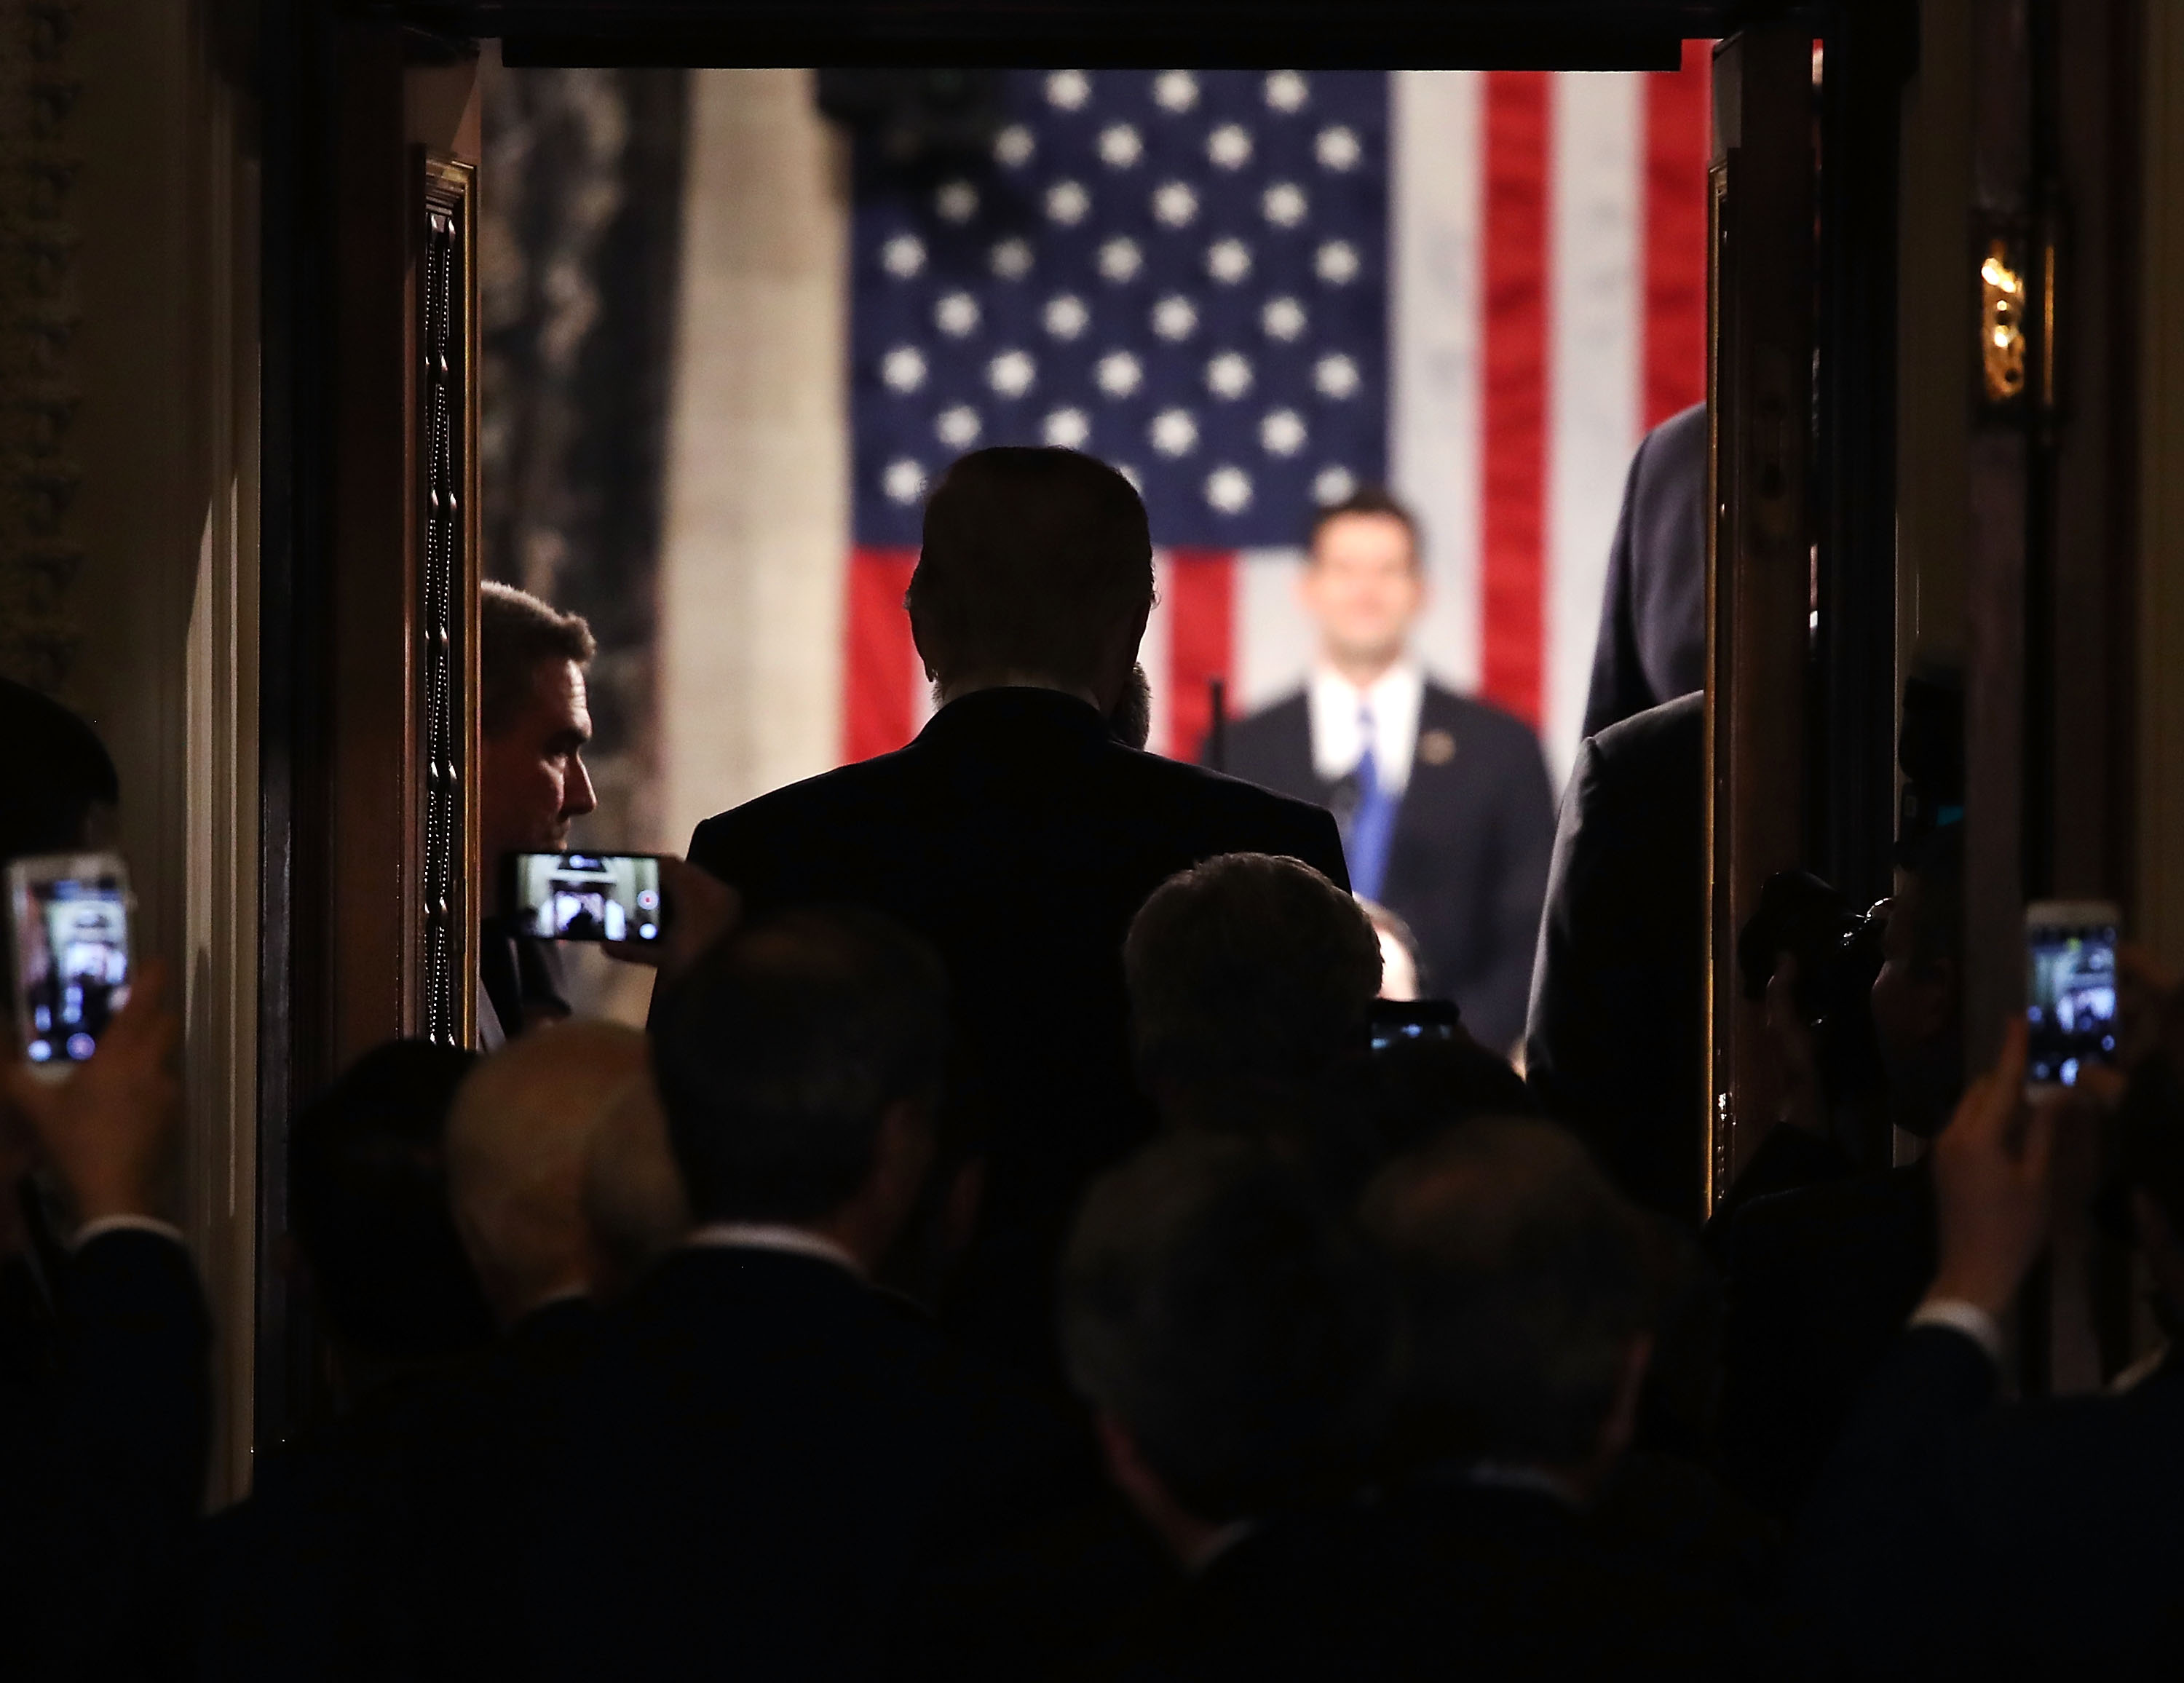 U.S. President Donald Trump stands in the doorway of the House chamber while being introduced to speak before a joint session of Congress on Feb. 28, 2017 in Washington, DC. (Mark Wilson—Getty Images)